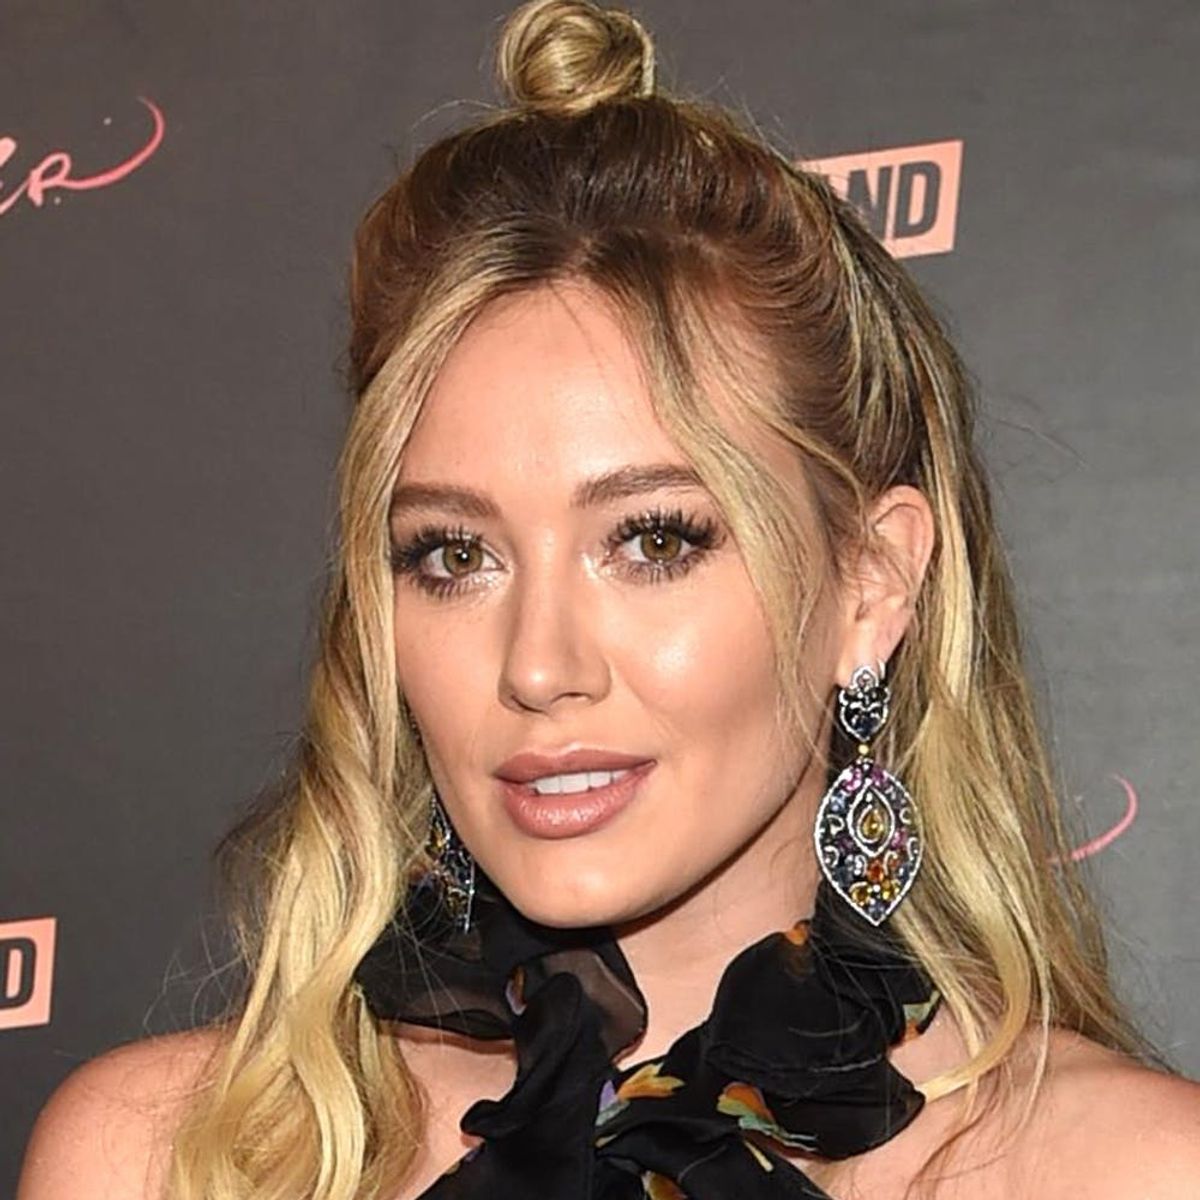 Hilary Duff’s Beverly Hills Home Was Reportedly Robbed of More Than $100,000 in Jewels